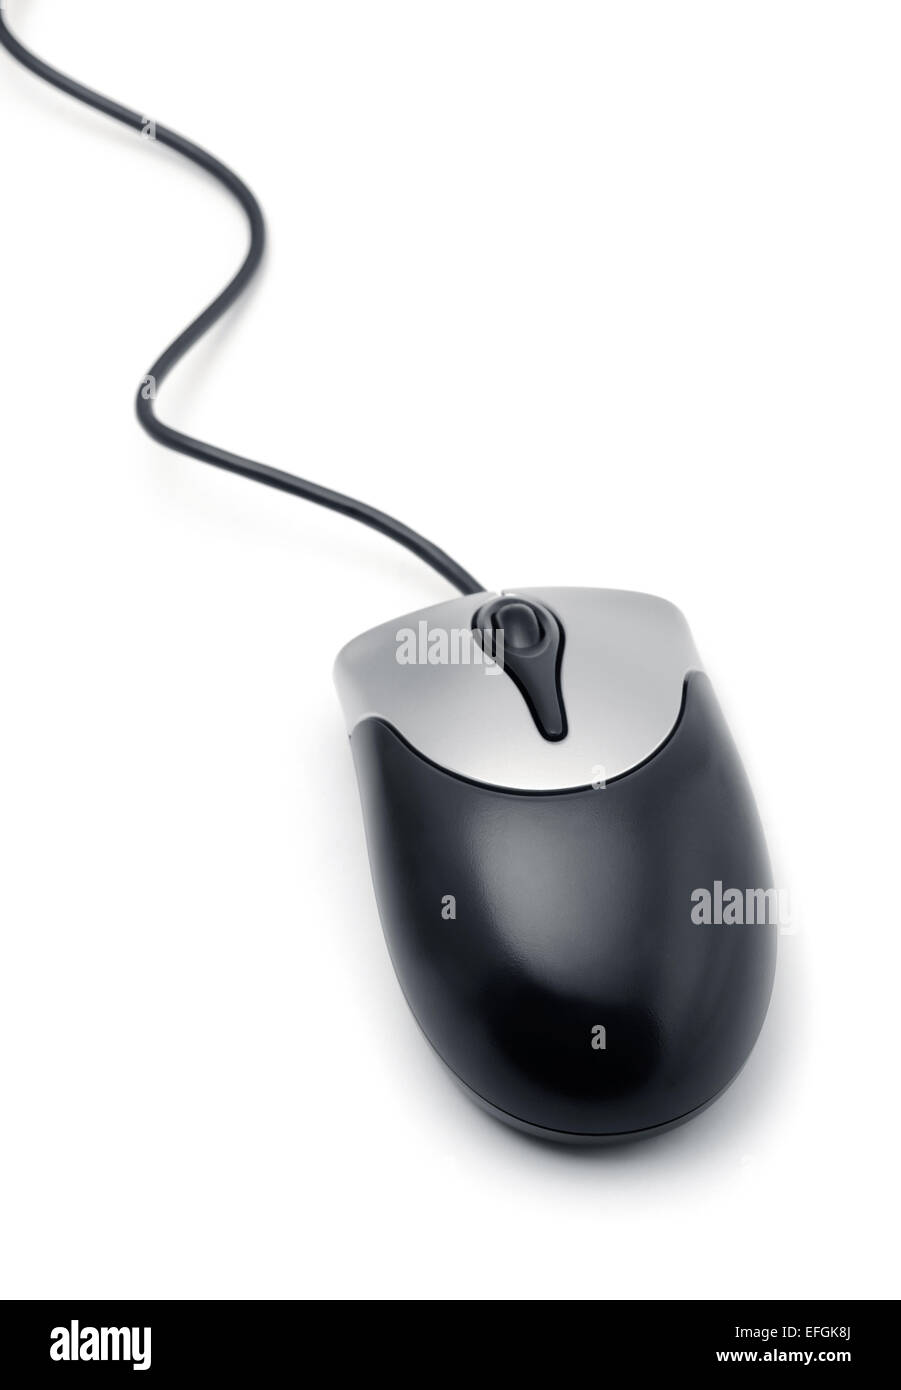 Black wired computer mouse isolated on white Stock Photo